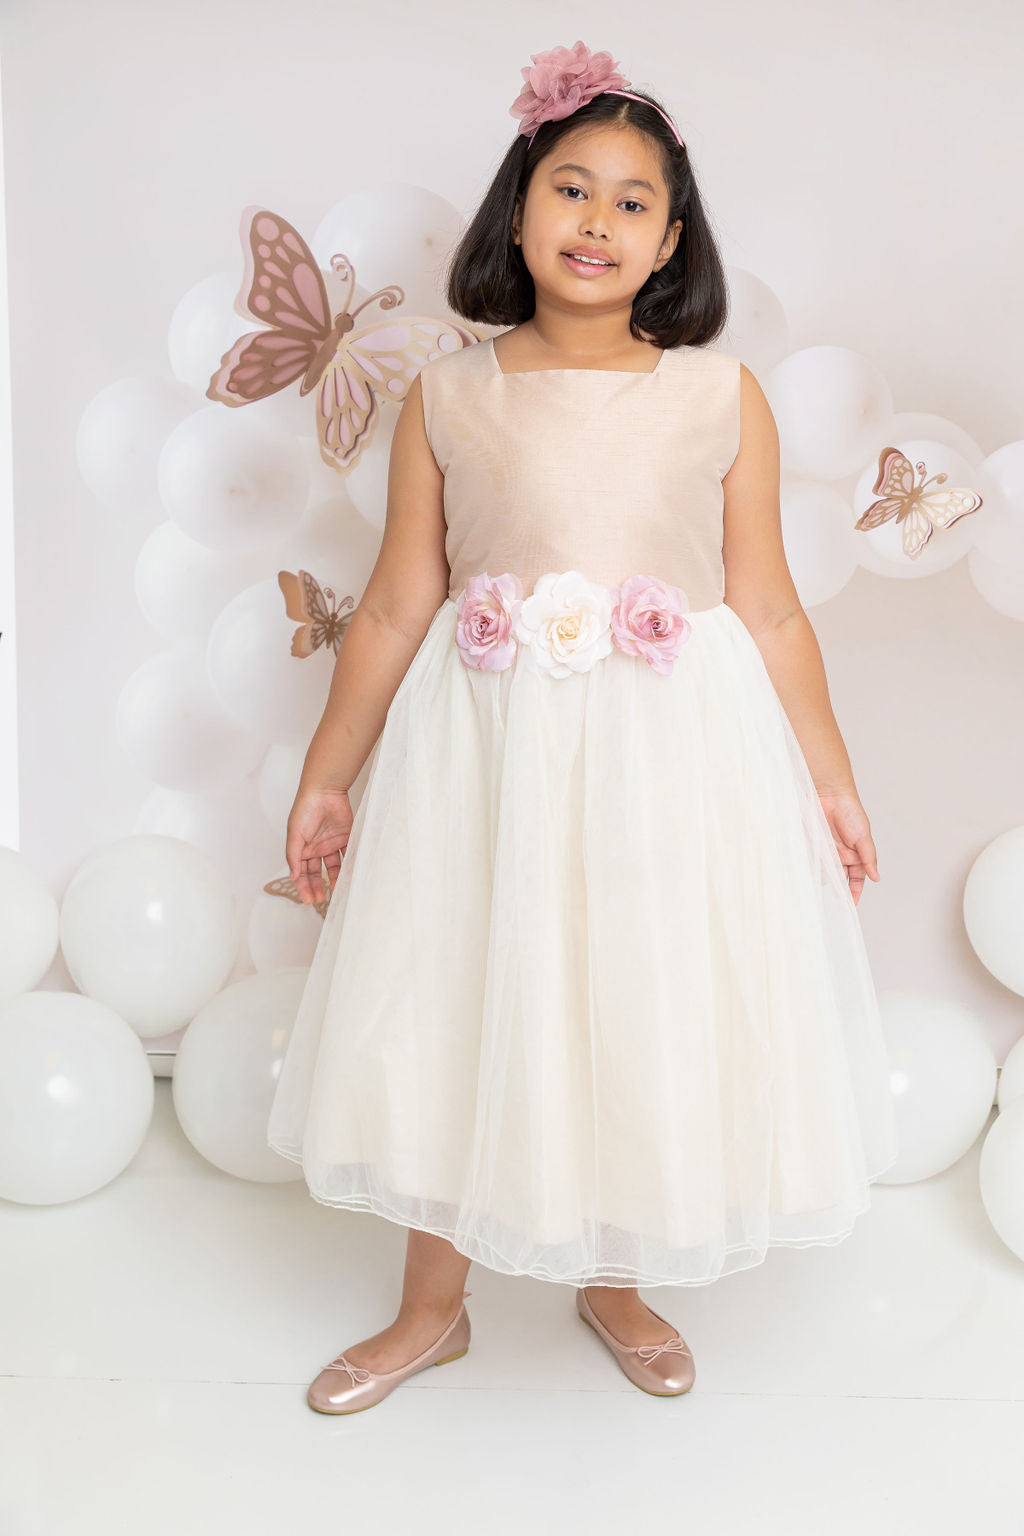 Poly Silk Tulle Girl Party Dress Plus Size by AS428 Kids Dream - Girl Formal Dresses